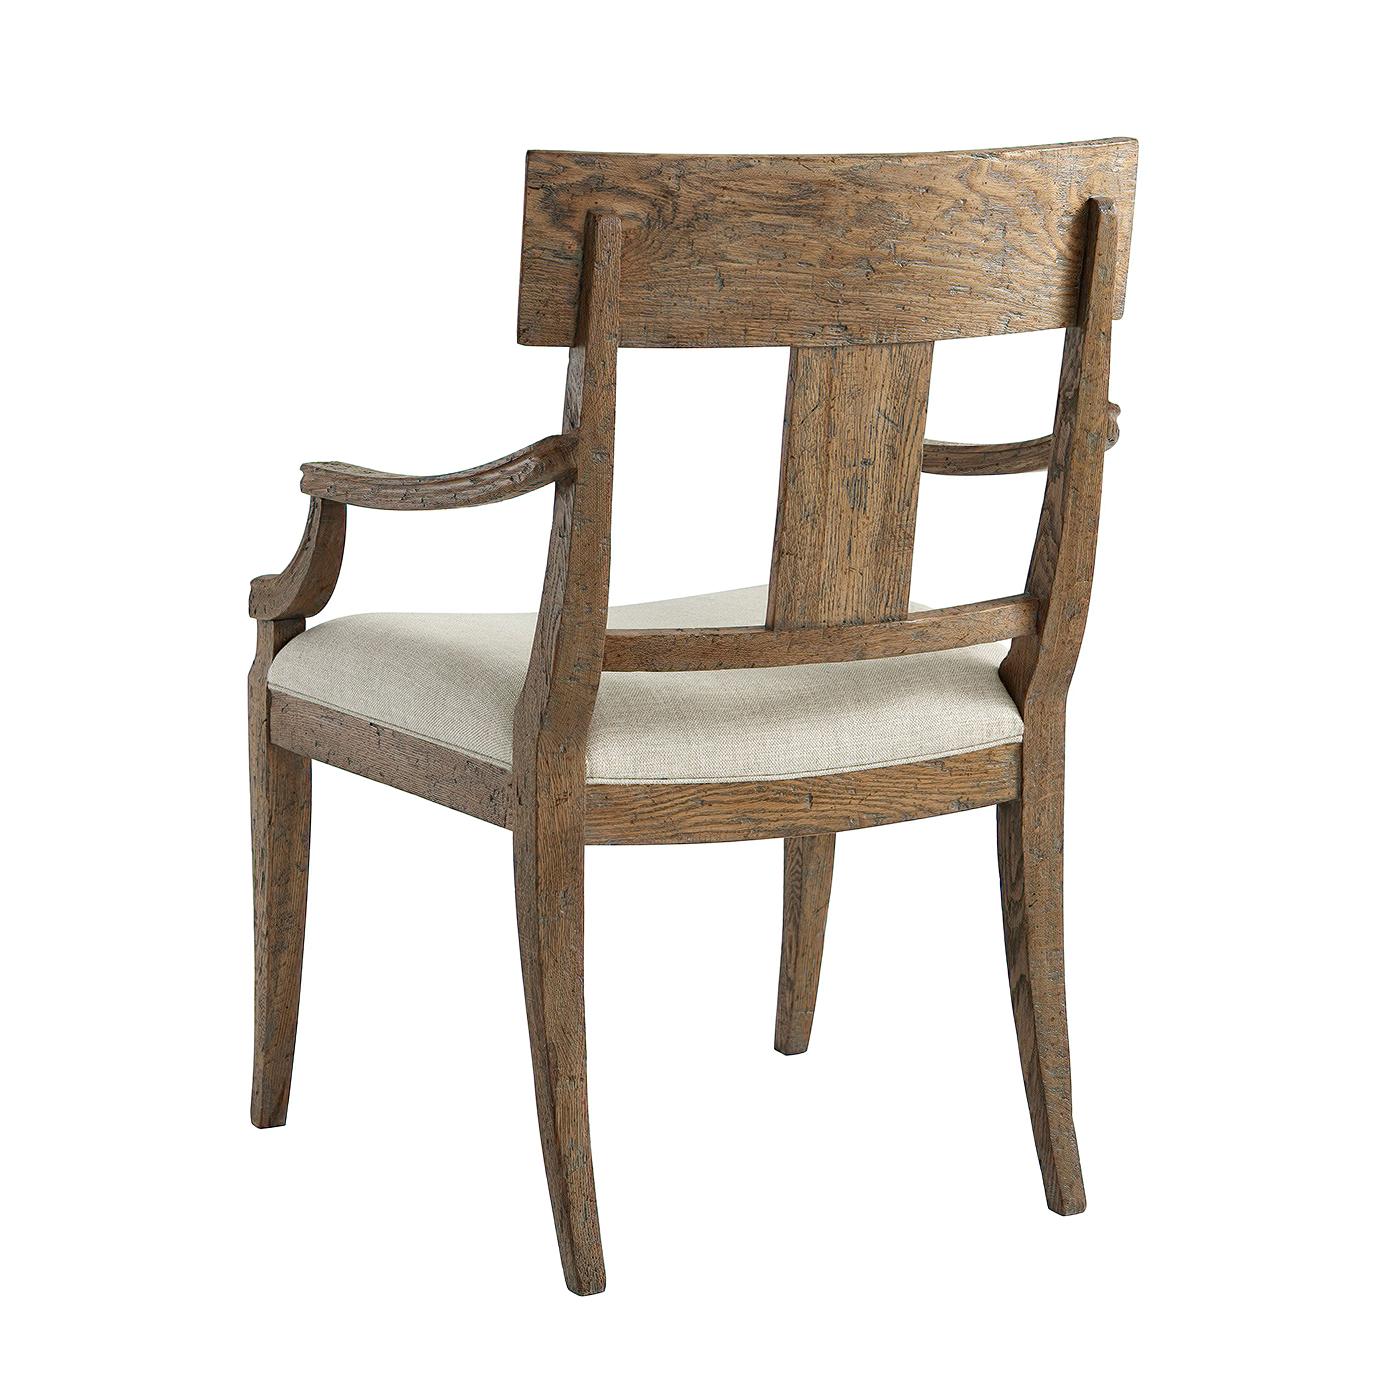 A rustic oak Klismos dining chair in our light Echo finish, with a parquetry bar top rail and splat, upholstered saddle seat raised on square tapered legs.

Dimensions: 23.75